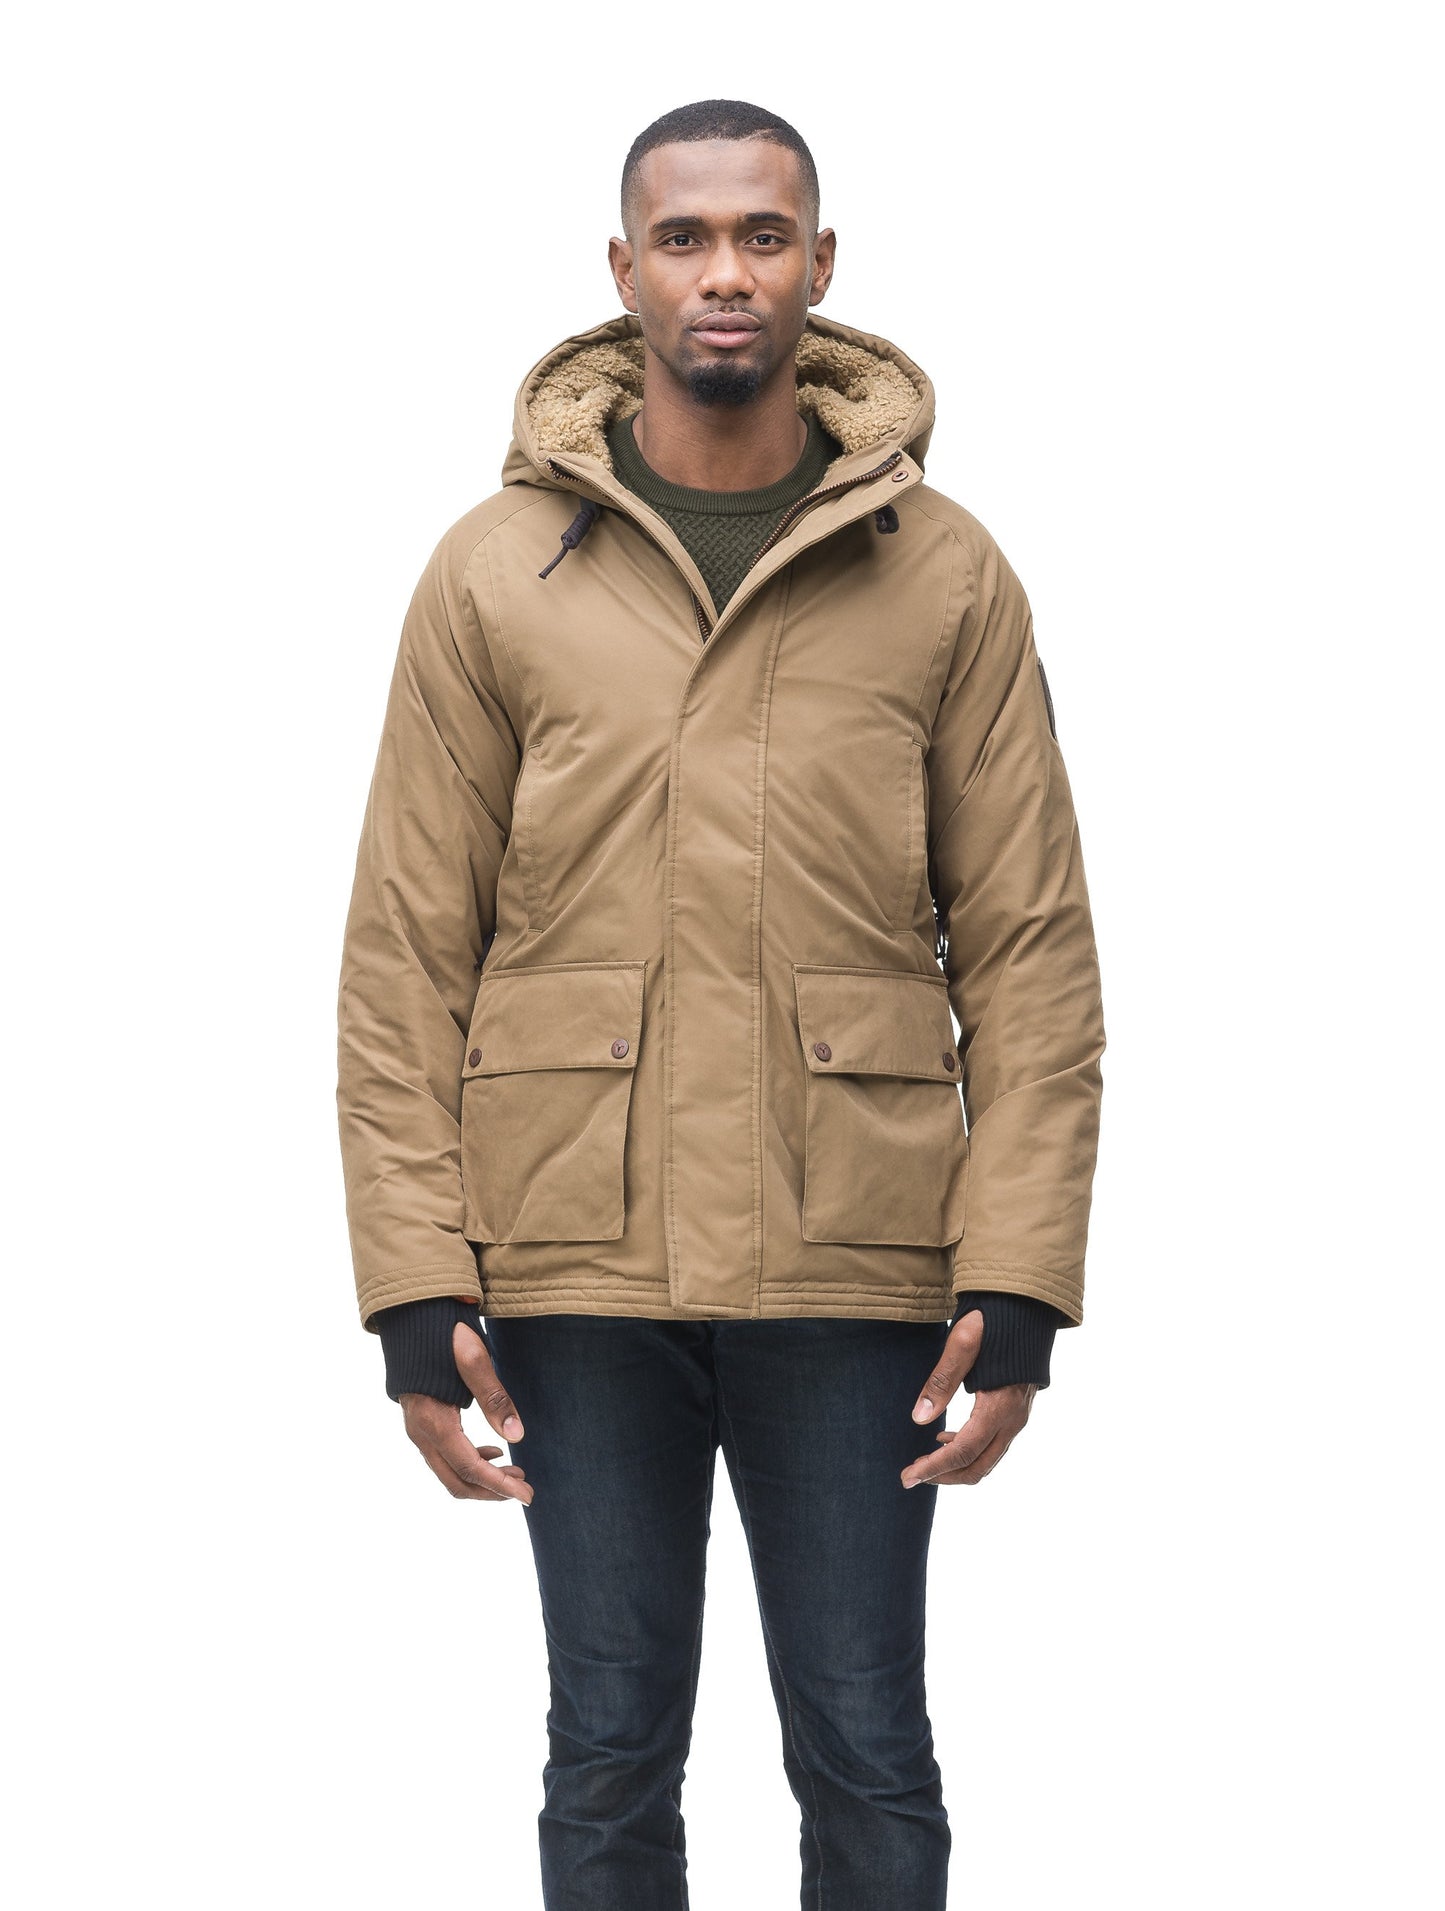 Men's town coat with Berber lined convertible collar and hood in Tan